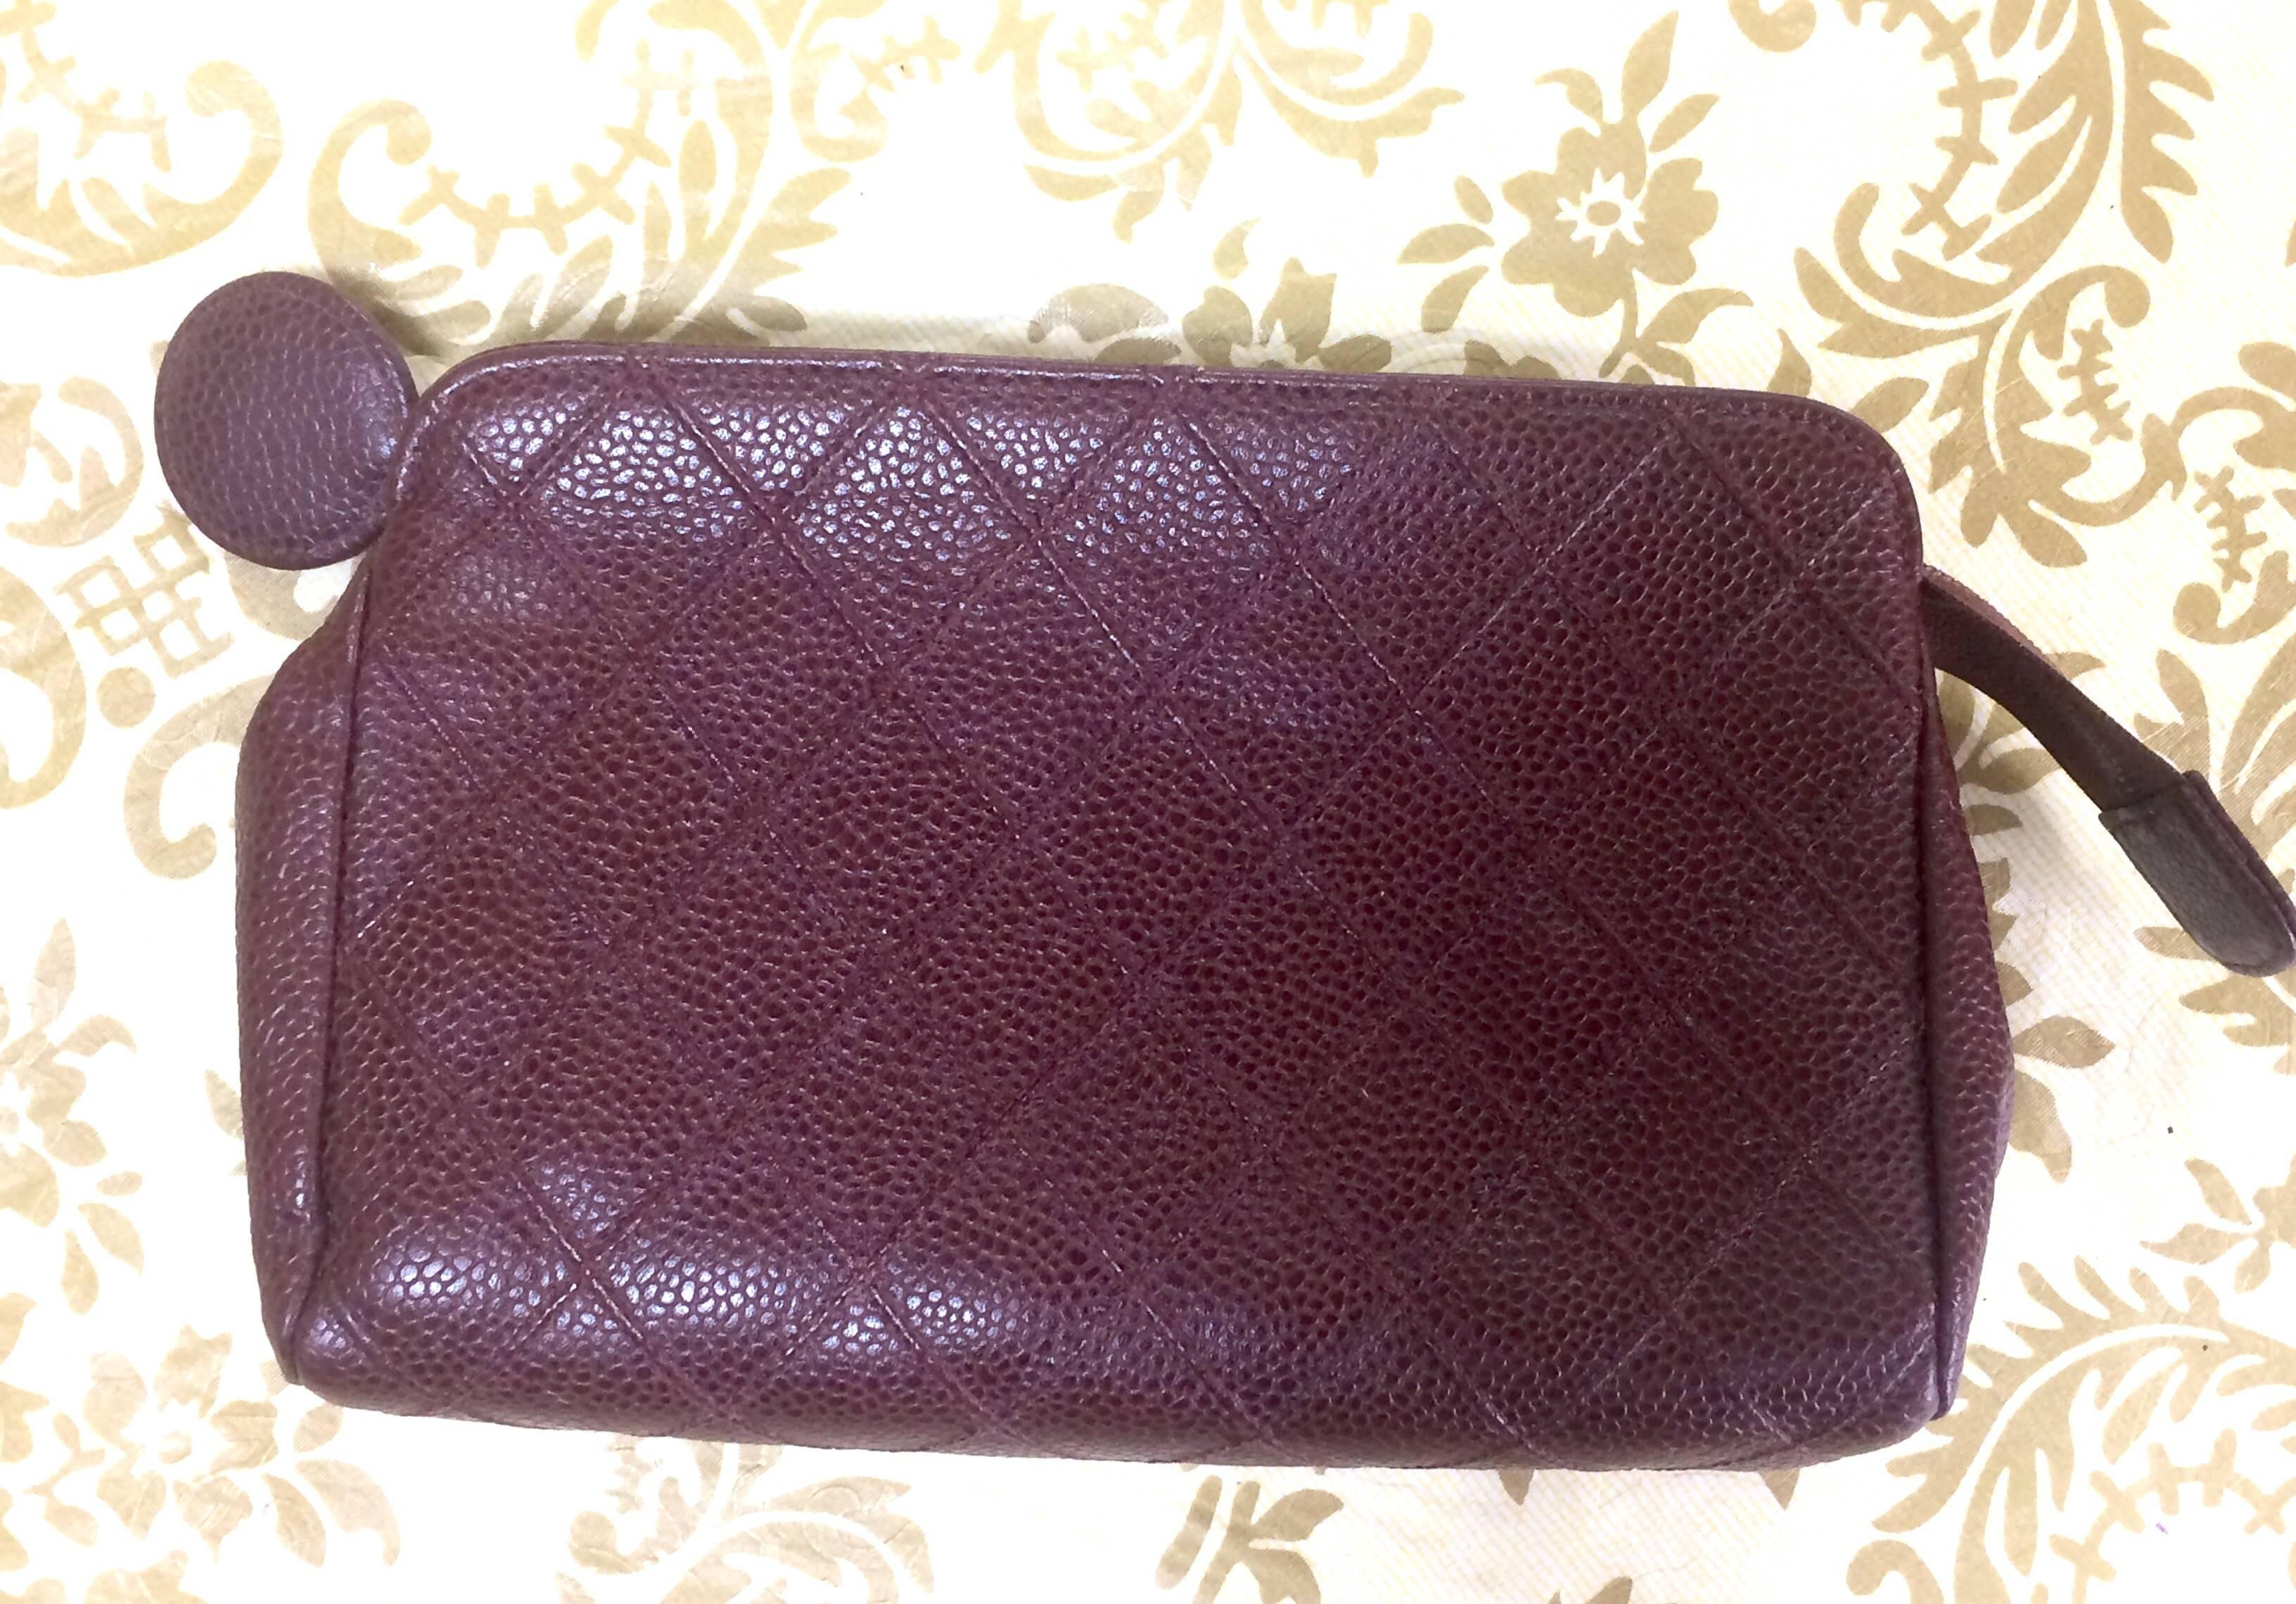 1990s. Vintage CHANEL wine brown caviar leather bicorole stitch cosmetic, toiletries pouch with golden CC charm pull.

This is a CHANEL vintage cosmetic pouch in wine brown caviarskin from the 90's. 

Classic purse to put your cosmetics/small